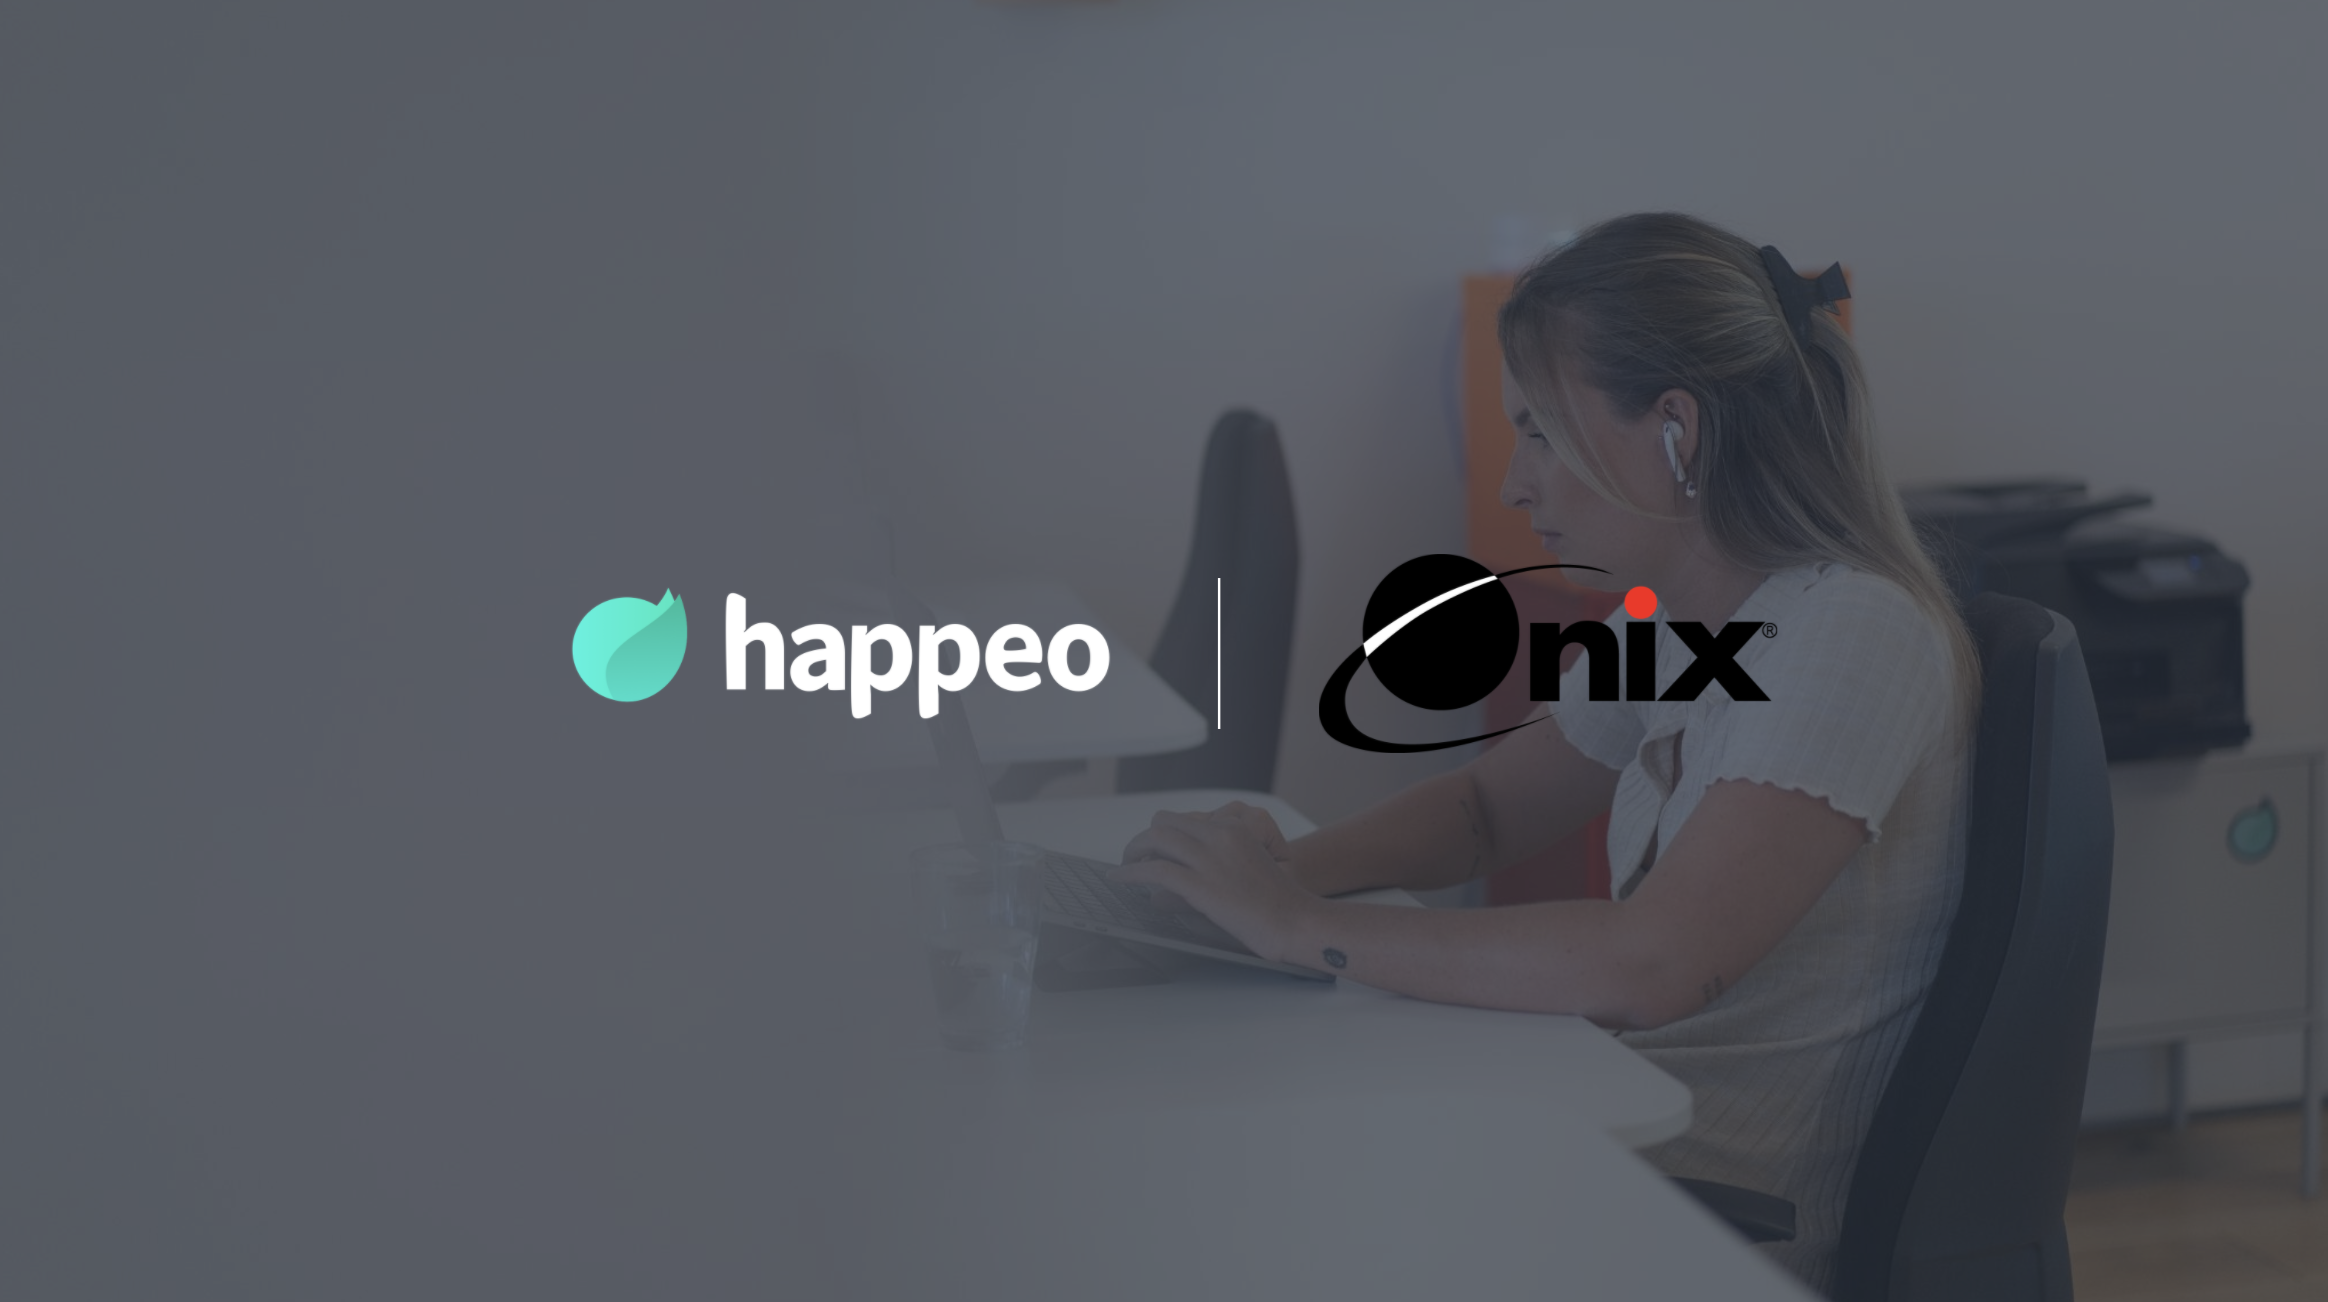 Onix, the first North American partner to become Happeo certified, Happeo opens its office in New York City